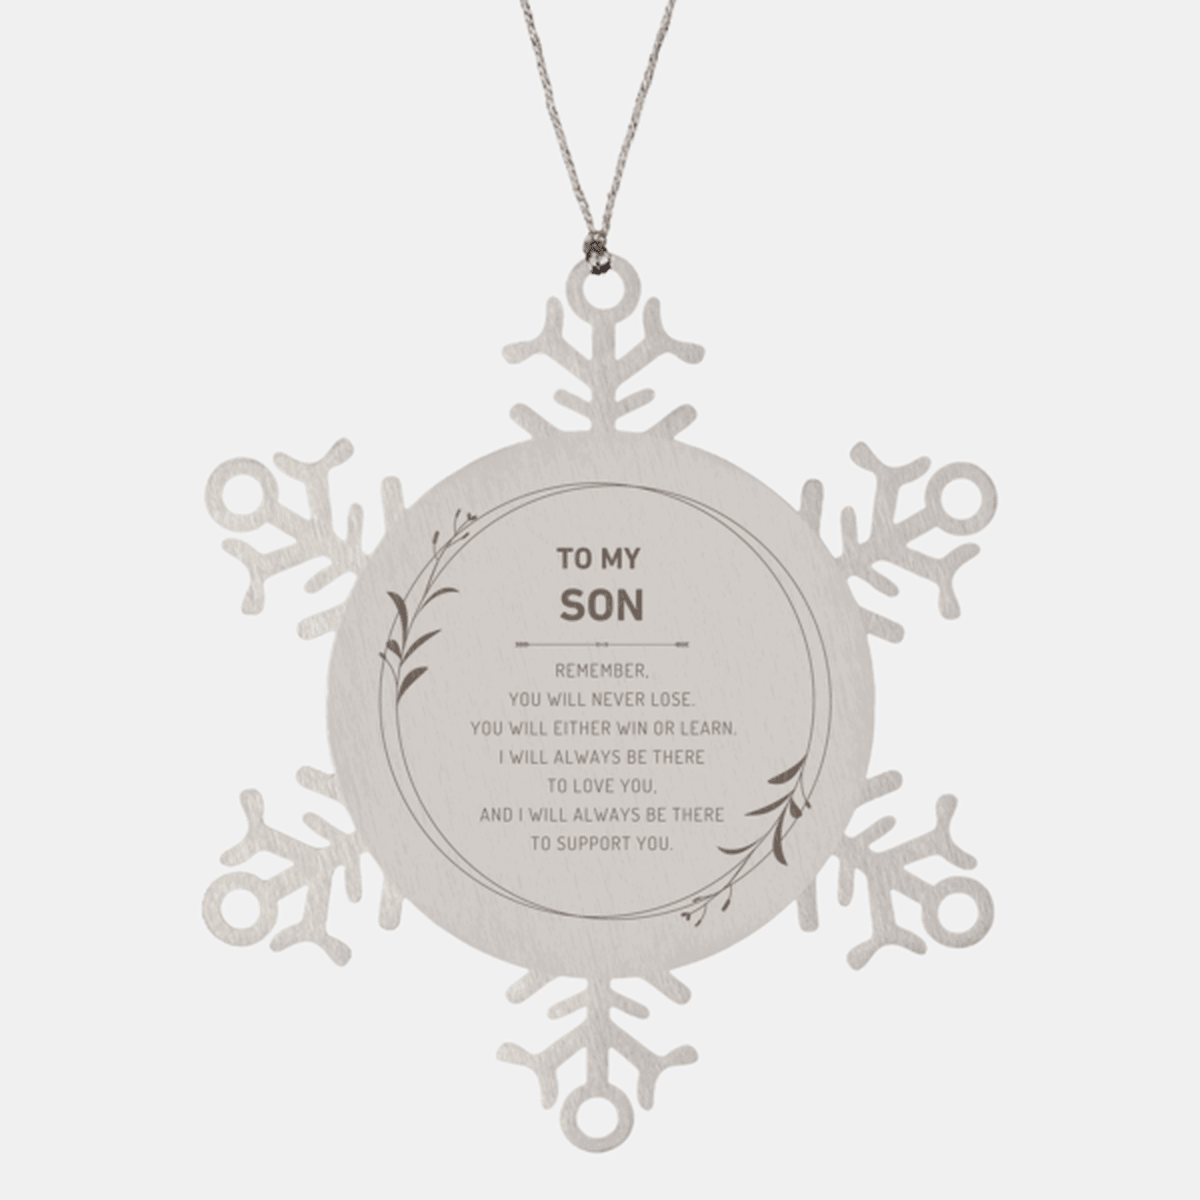 Son Ornament Gifts, To My Son Remember, you will never lose. You will either WIN or LEARN, Keepsake Snowflake Ornament For Son, Birthday Christmas Gifts Ideas For Son X-mas Gifts - Mallard Moon Gift Shop